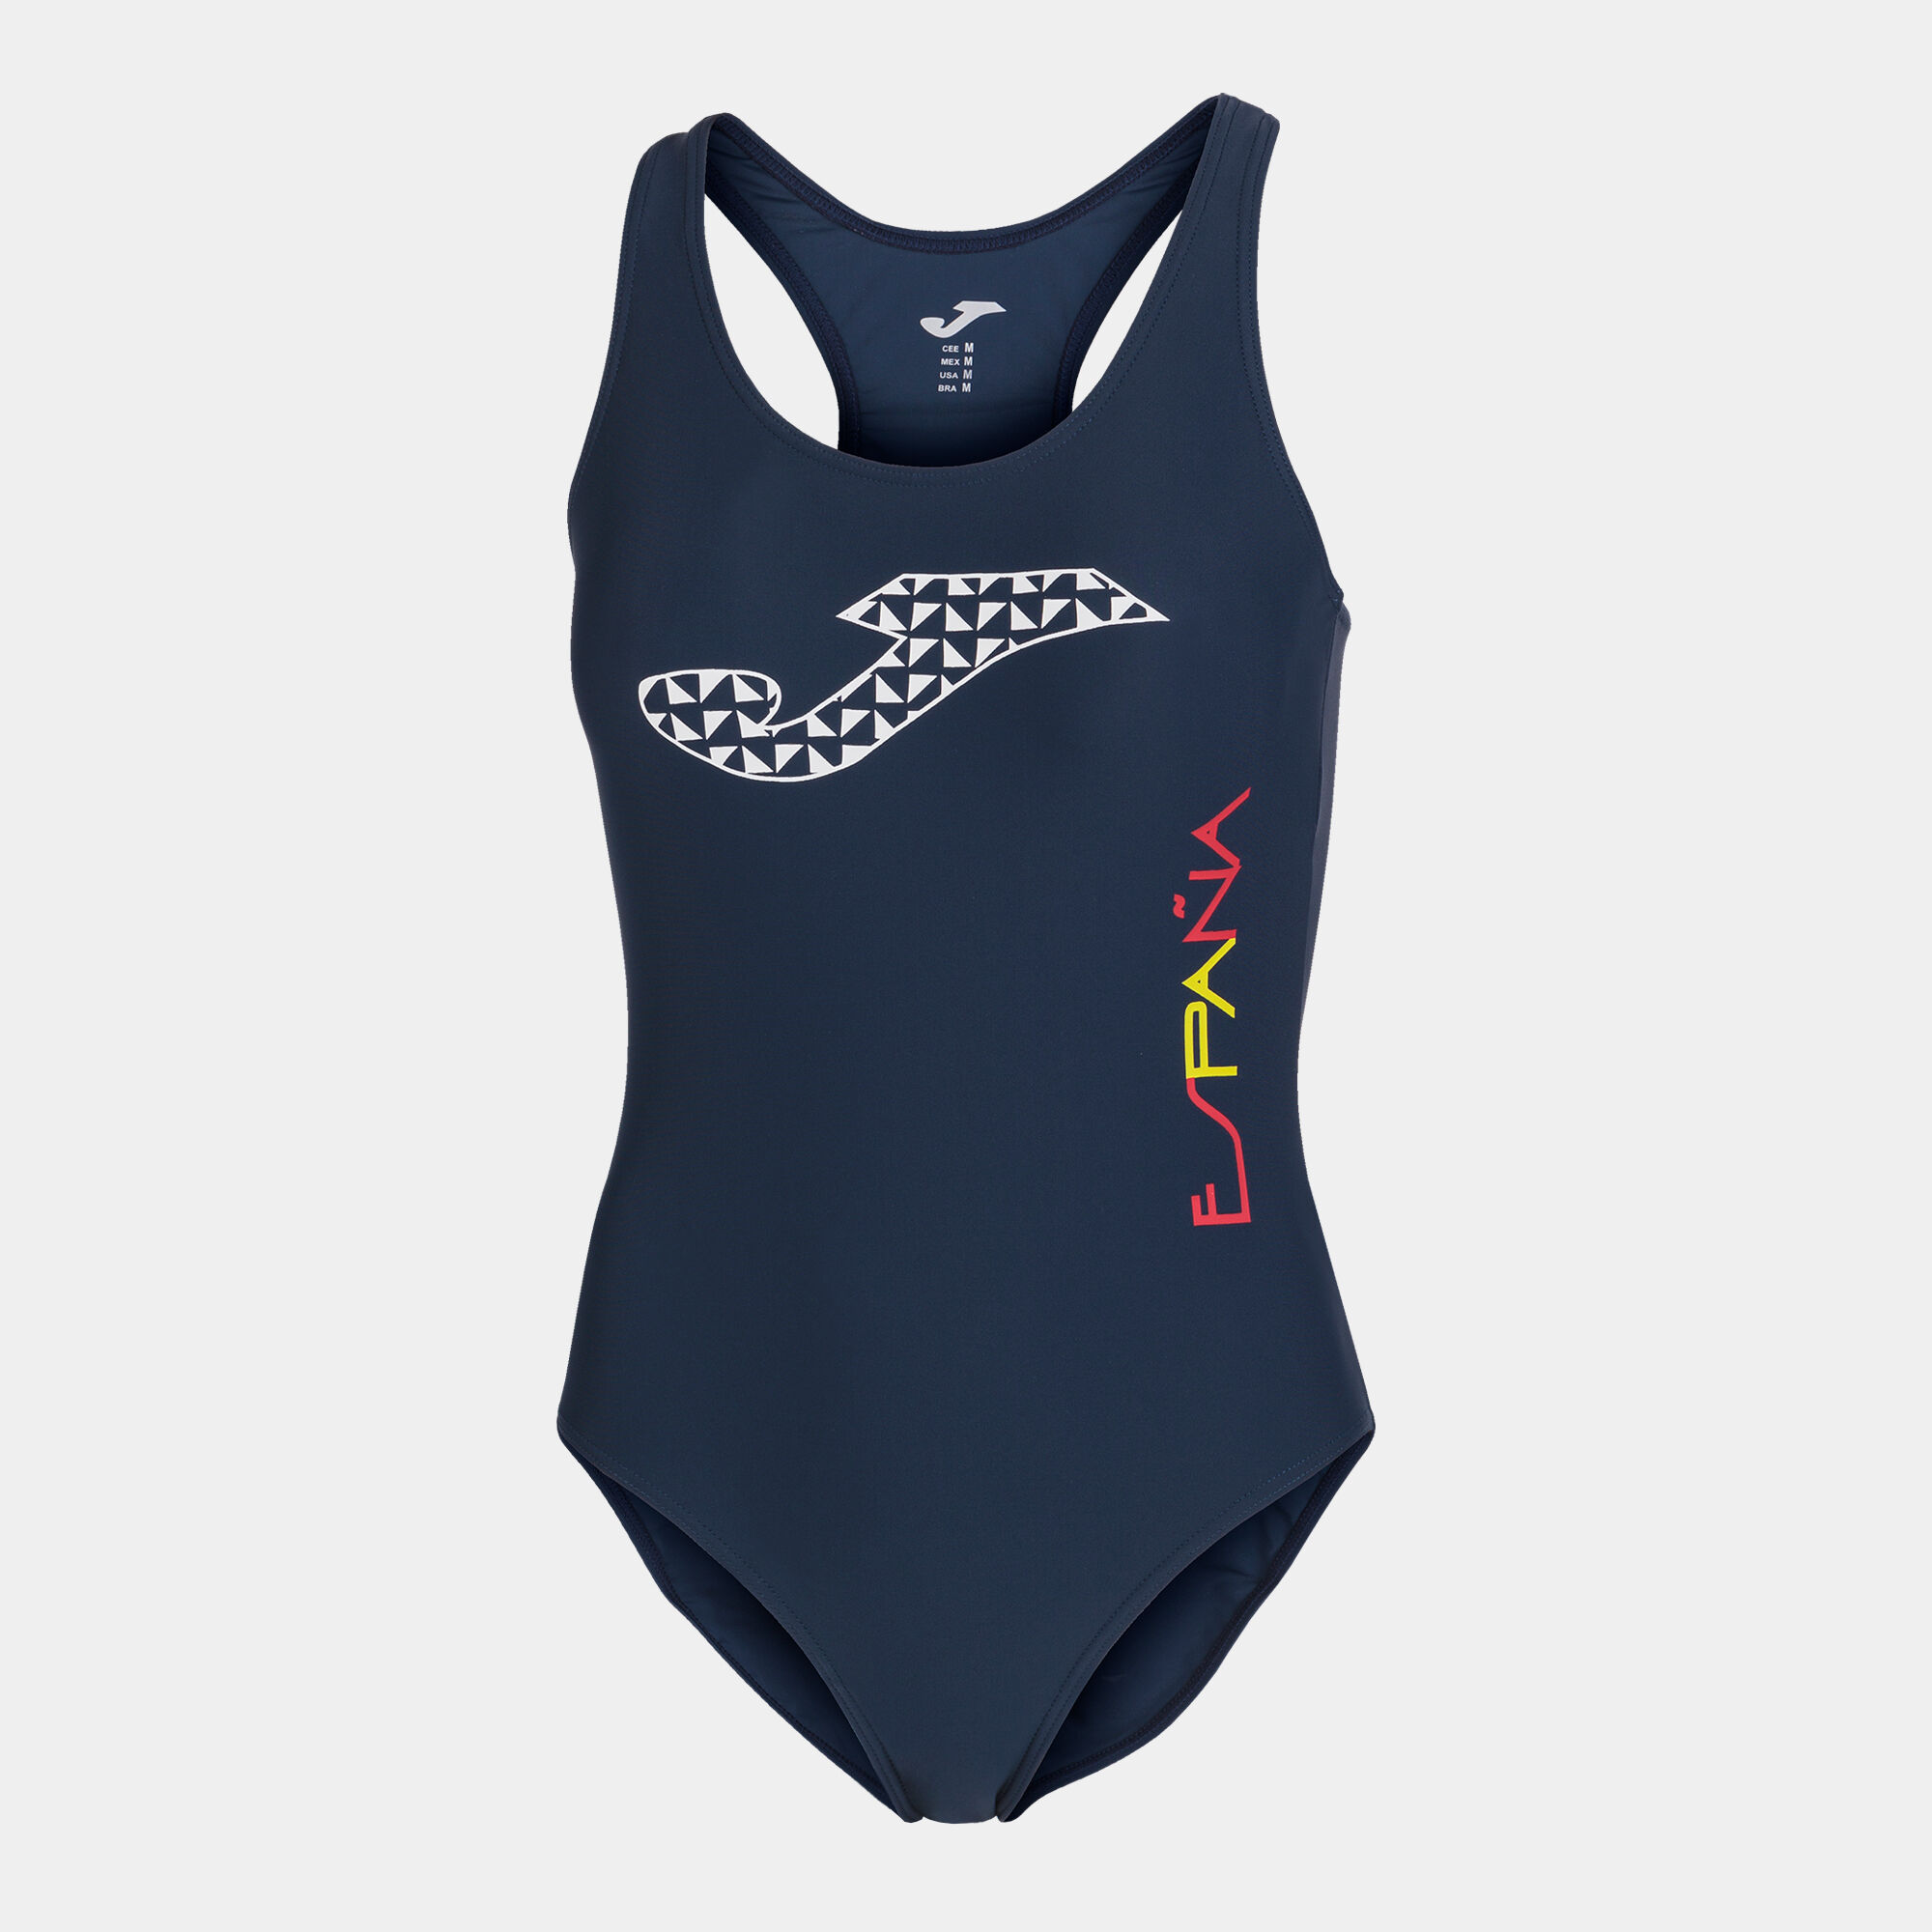 SWIMSUIT SPANISH OLYMPIC COMMITTEE WOMAN